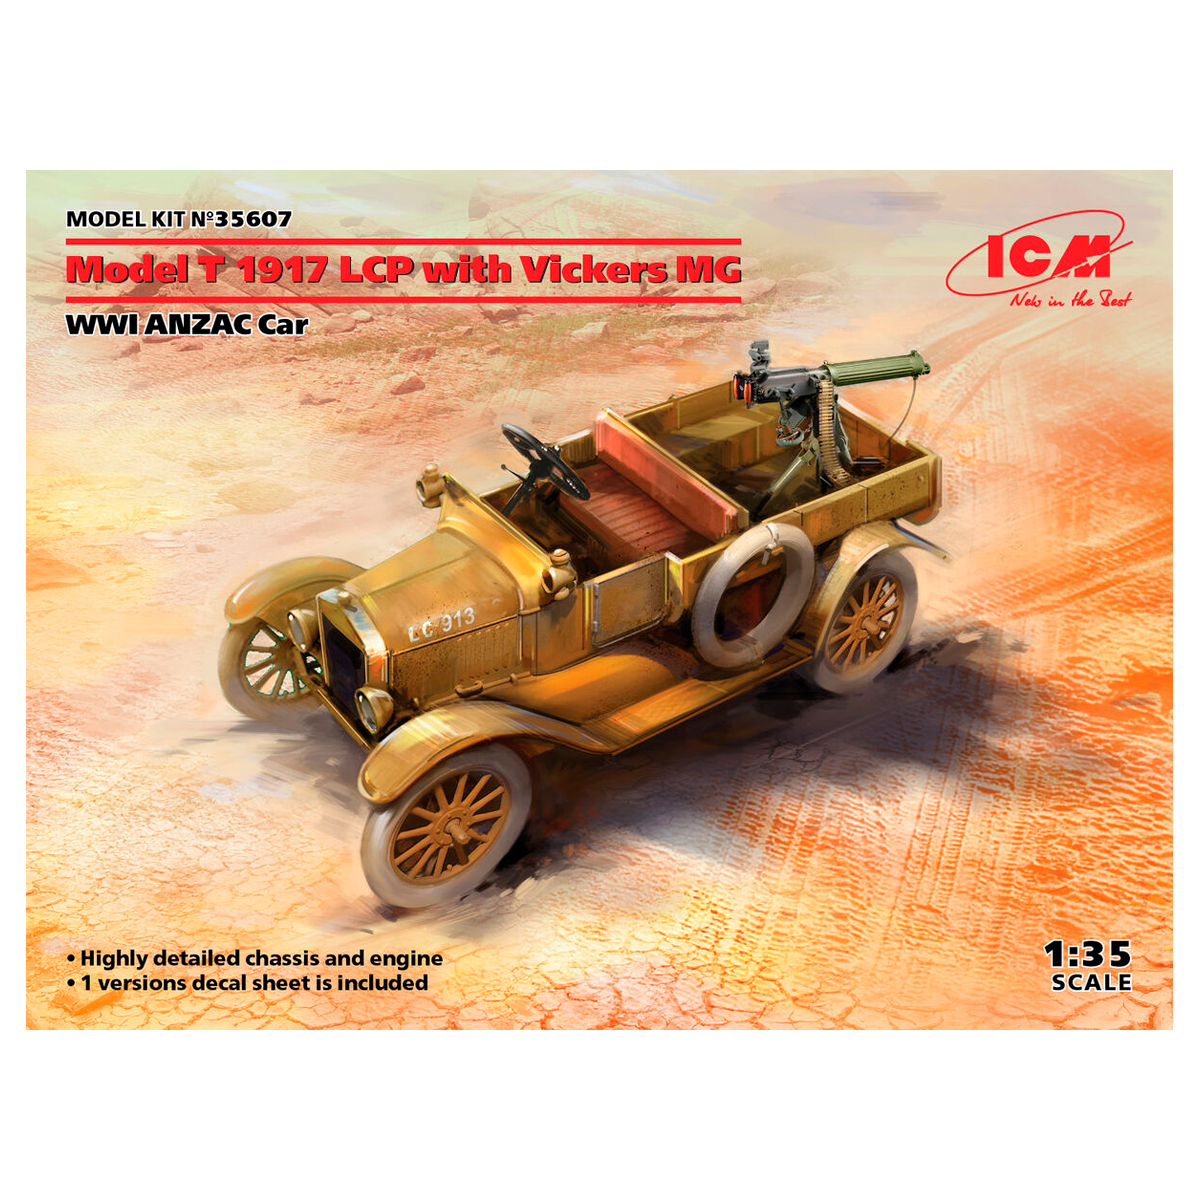 Model T 1917 LCP with Vickers MG, WWI ANZAC Car 1/35